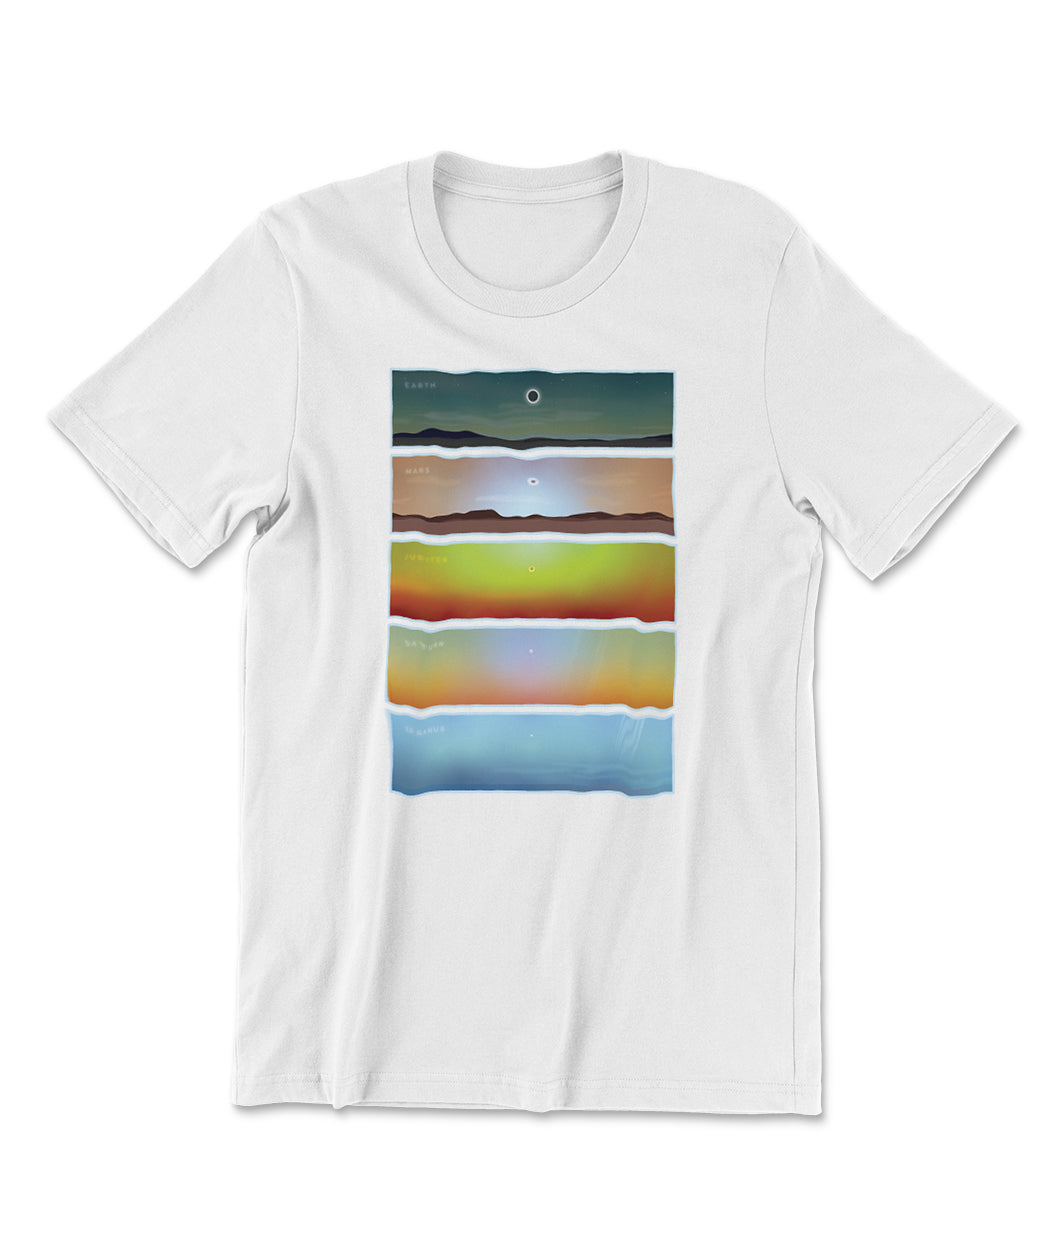 A white t-shirt with a design on the front of a solar eclipse seen from the point of view of several planets. From MinuteEarth.